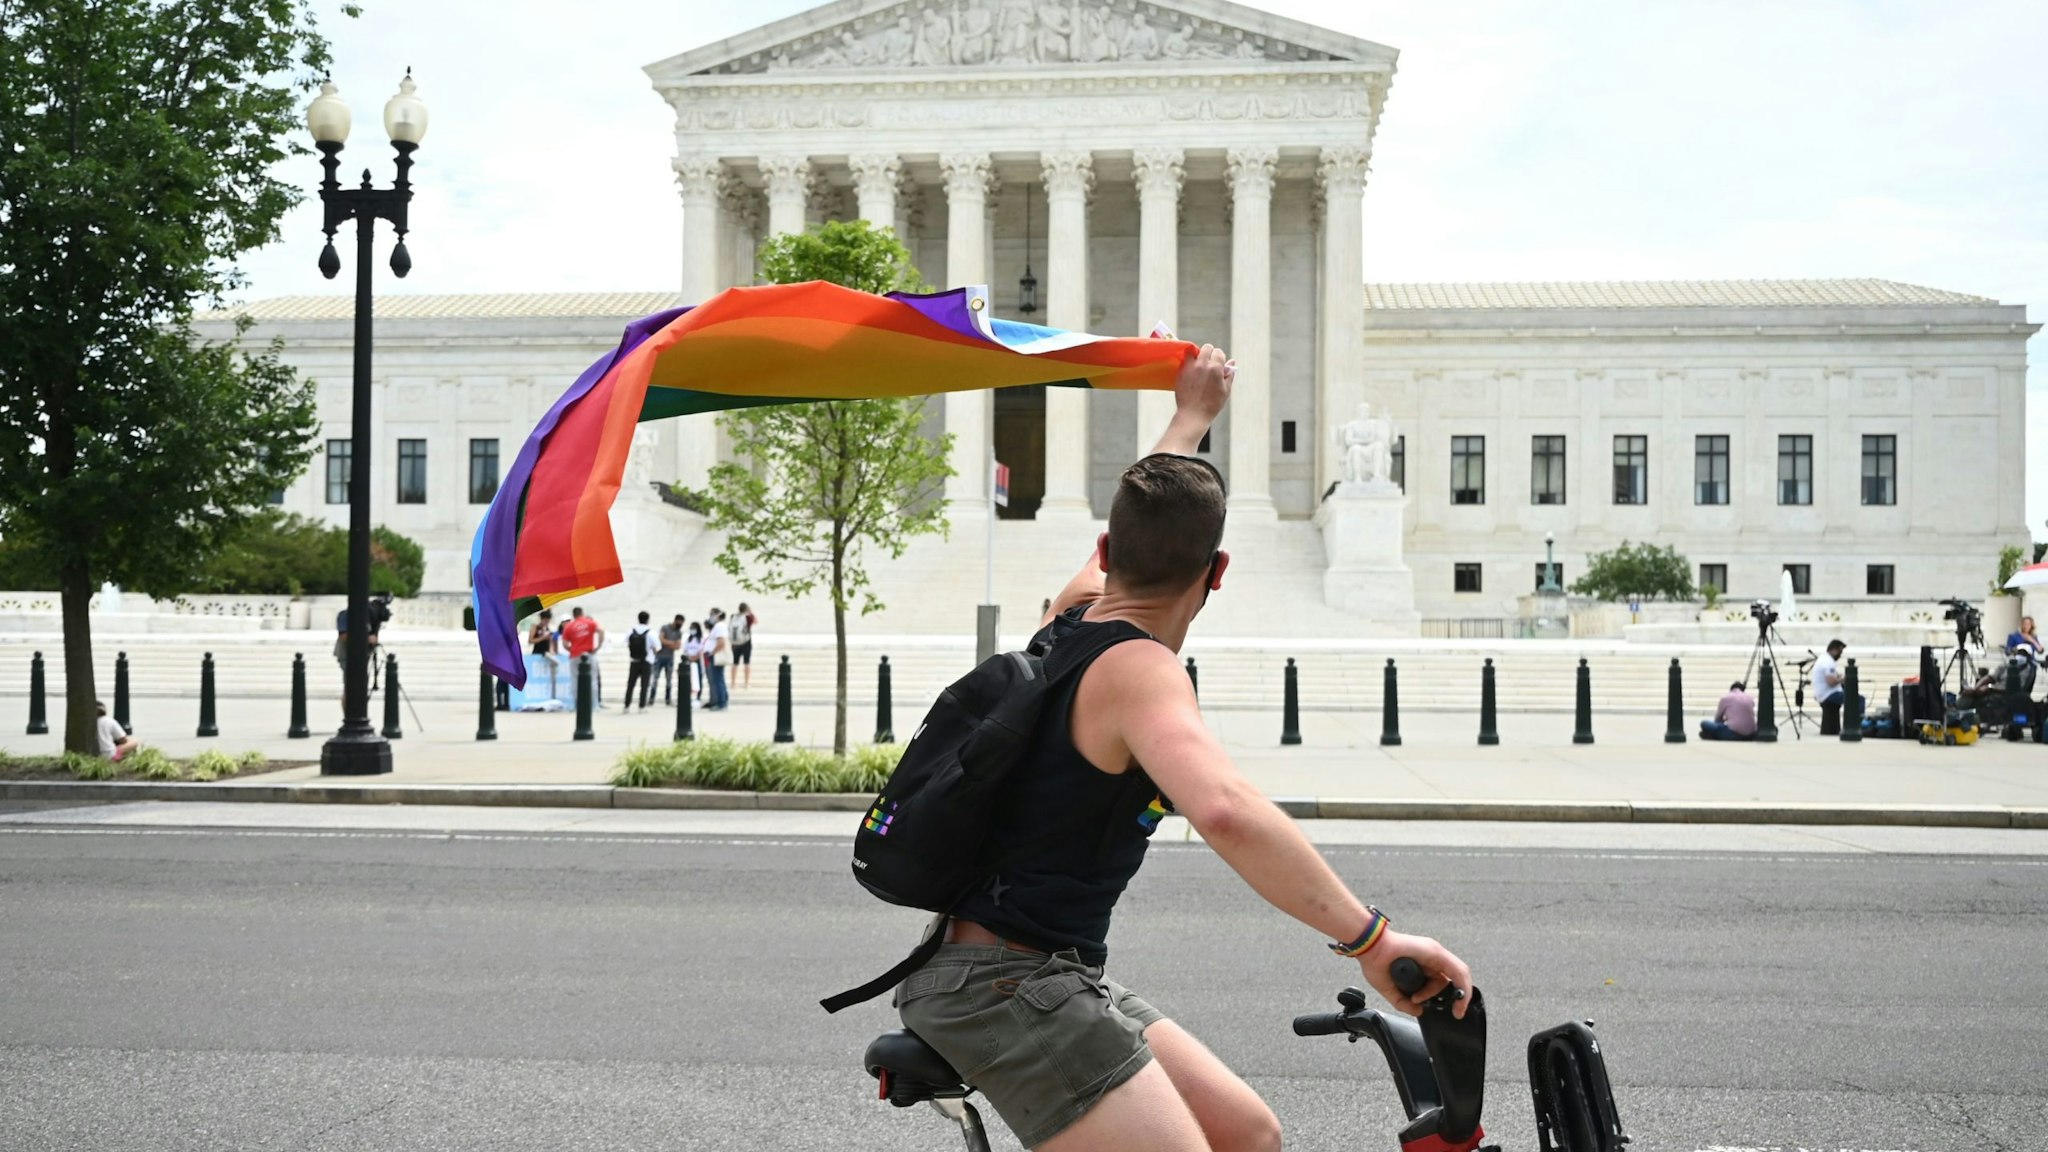 A man waves a rainbow flag as he rides by the US Supreme Court that released a decision that says federal law protects LGBTQ workers from discrimination on June 15, 2020 in Washington,DC. - The US top court has ruled it illegal to fire workers based on sexual orientation. (Photo by JIM WATSON / AFP) (Photo by JIM WATSON/AFP via Getty Images)